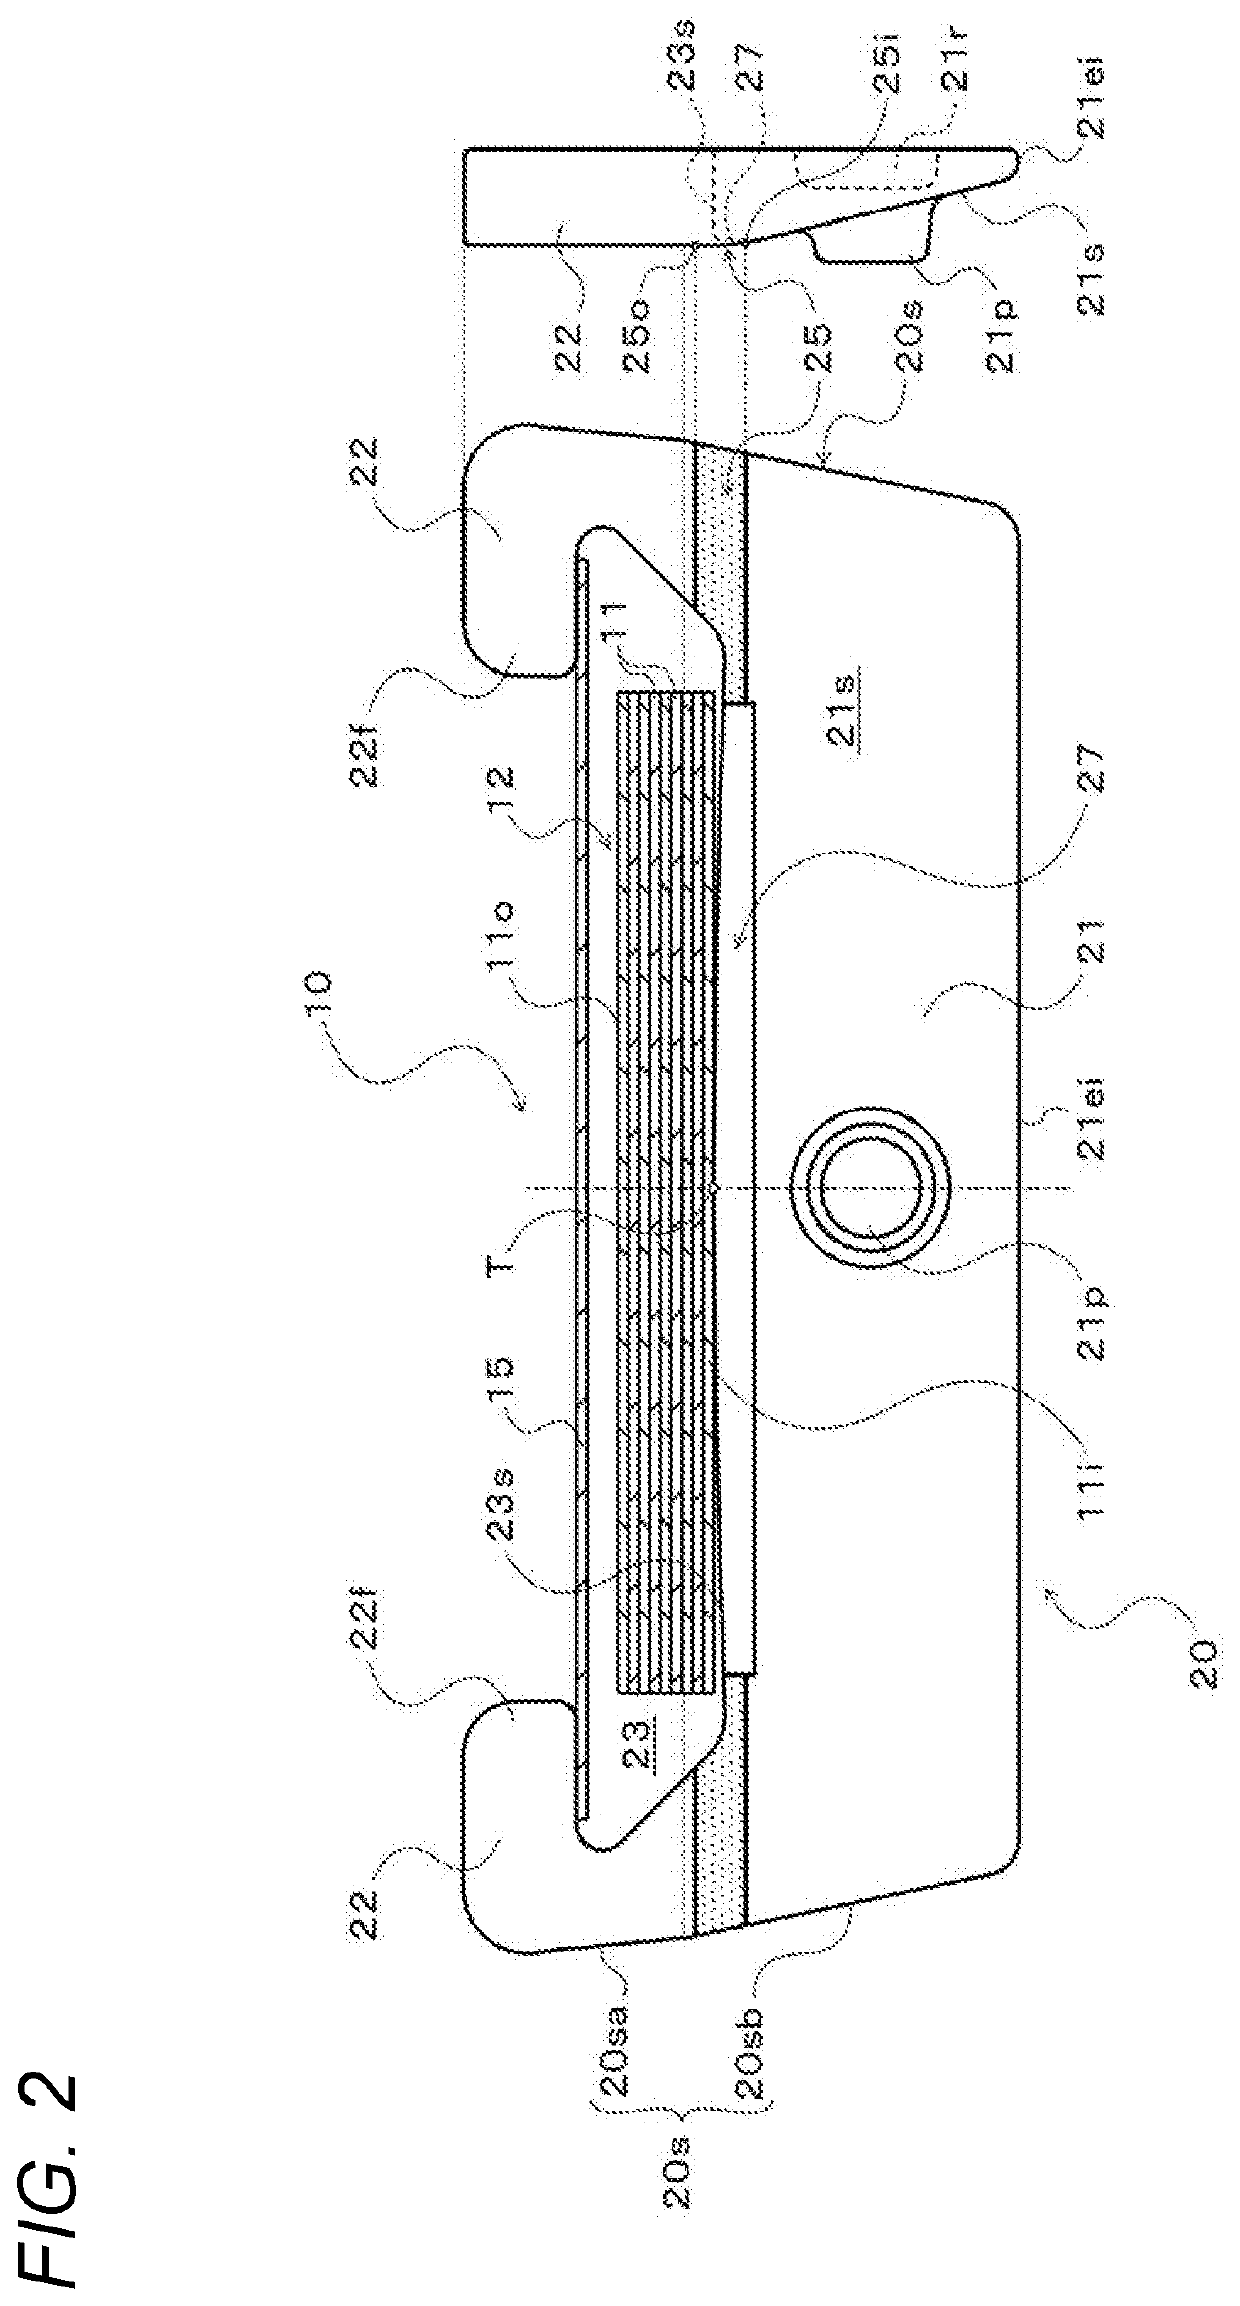 Transmission belt and continuously variable transmission, method for designing element, and method for producing element